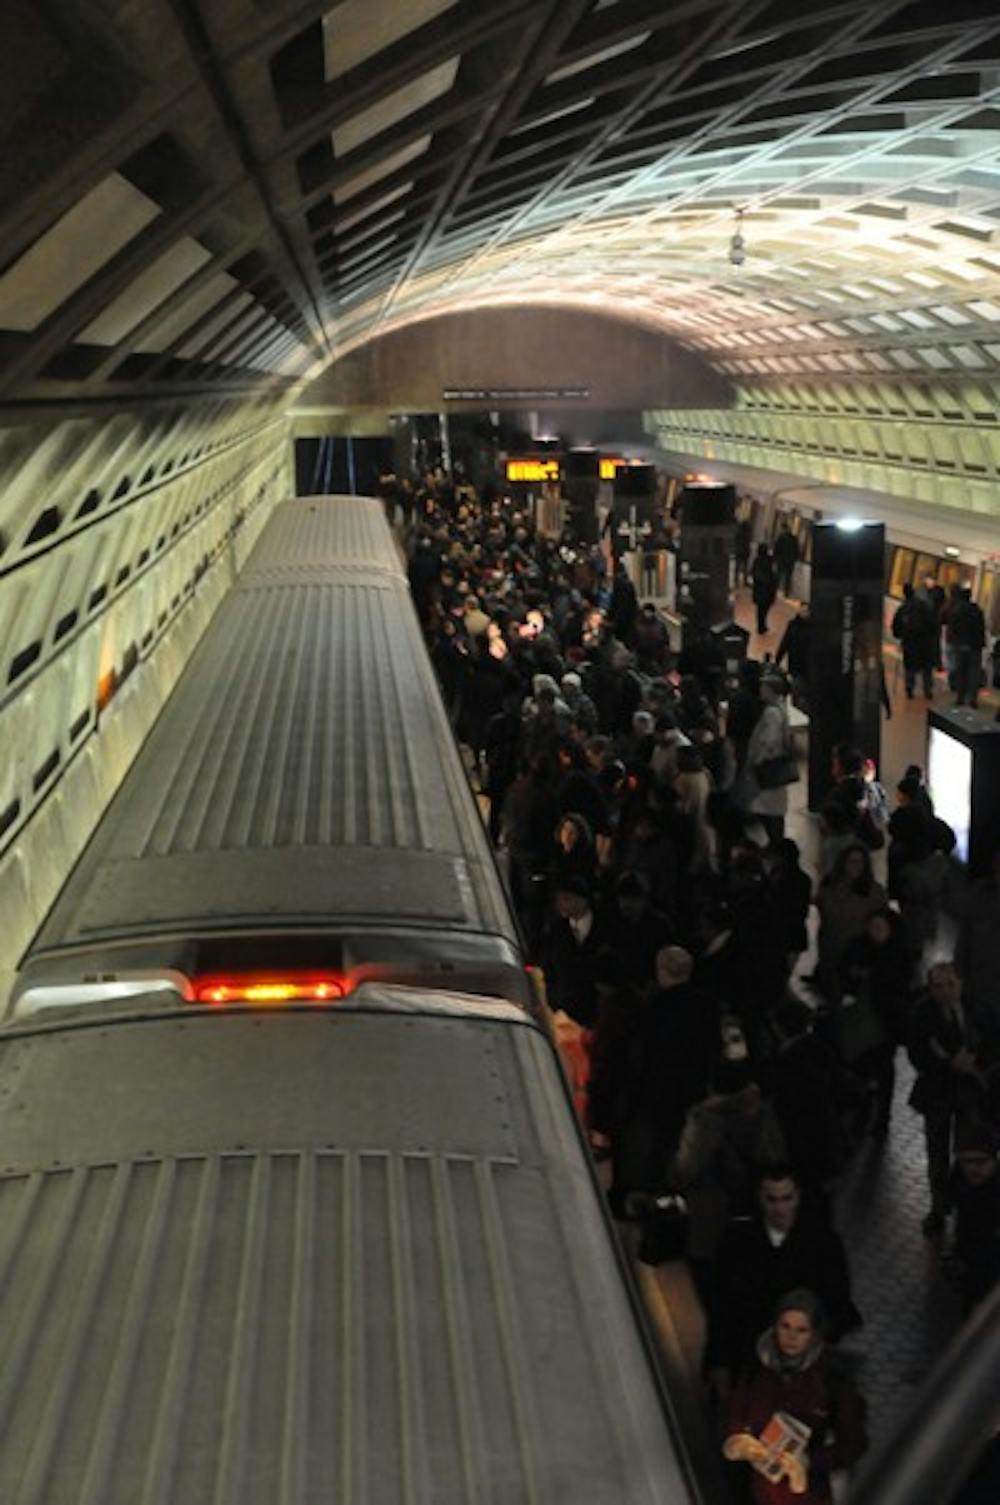 IN THE RED â€“ WMATA may continue to allow metrorail riders to exit the system with negative balances on their SmarTrip cards, despite last monthâ€™s announcement otherwise.